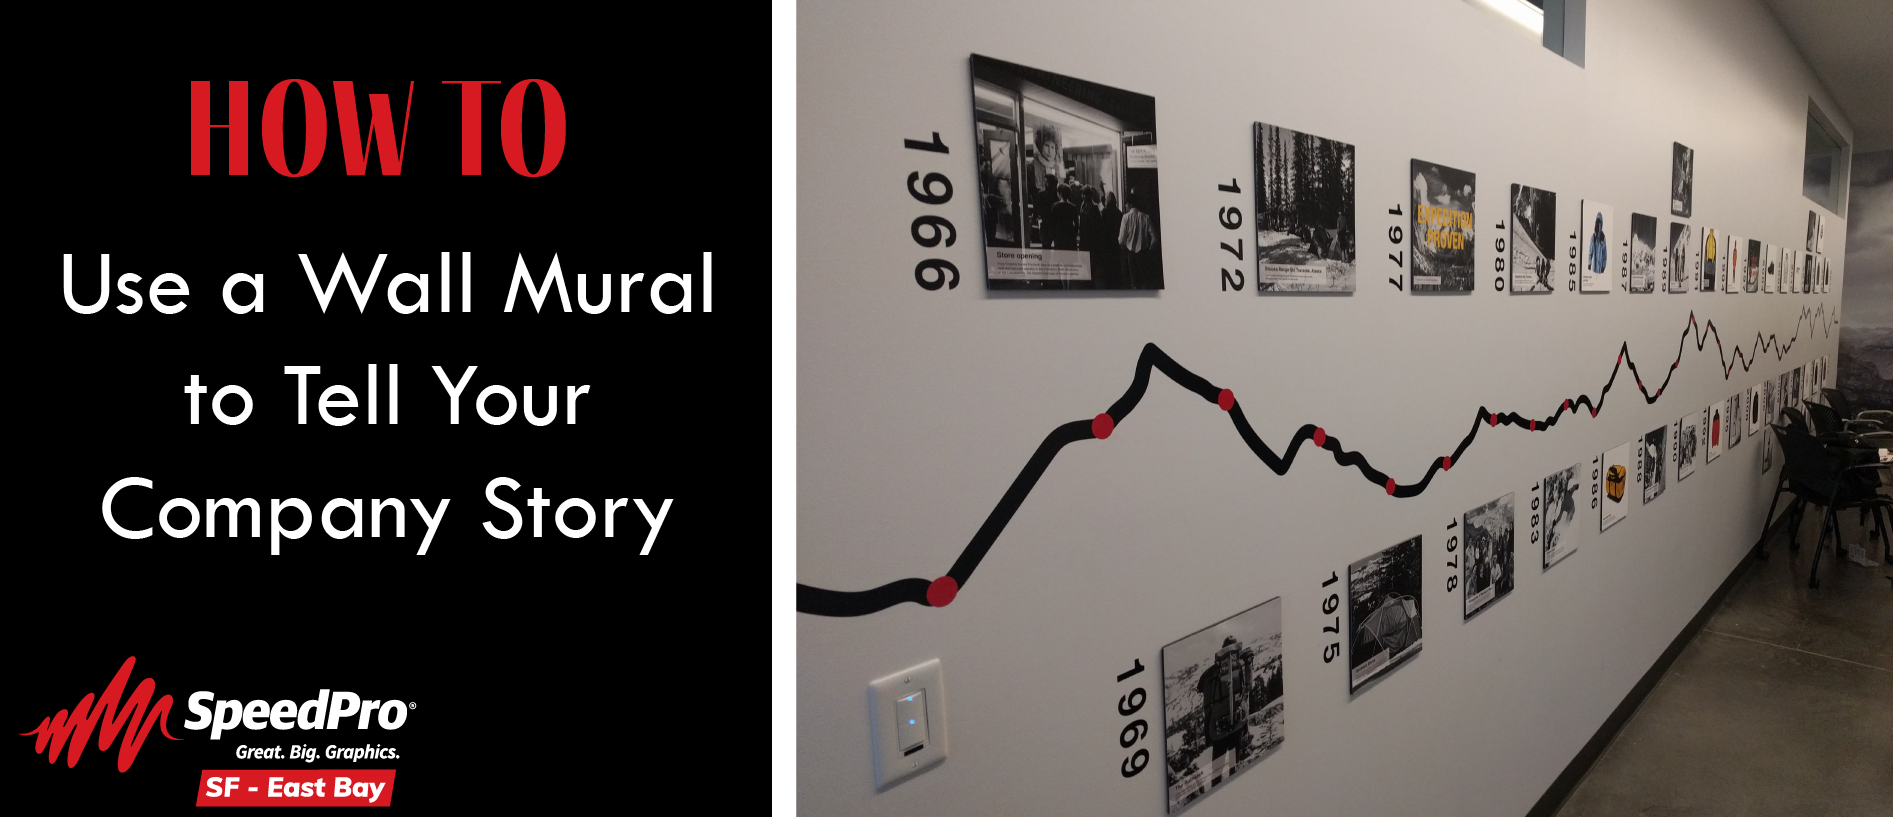 How to use a wall mural to tell your company story with SpeedPro